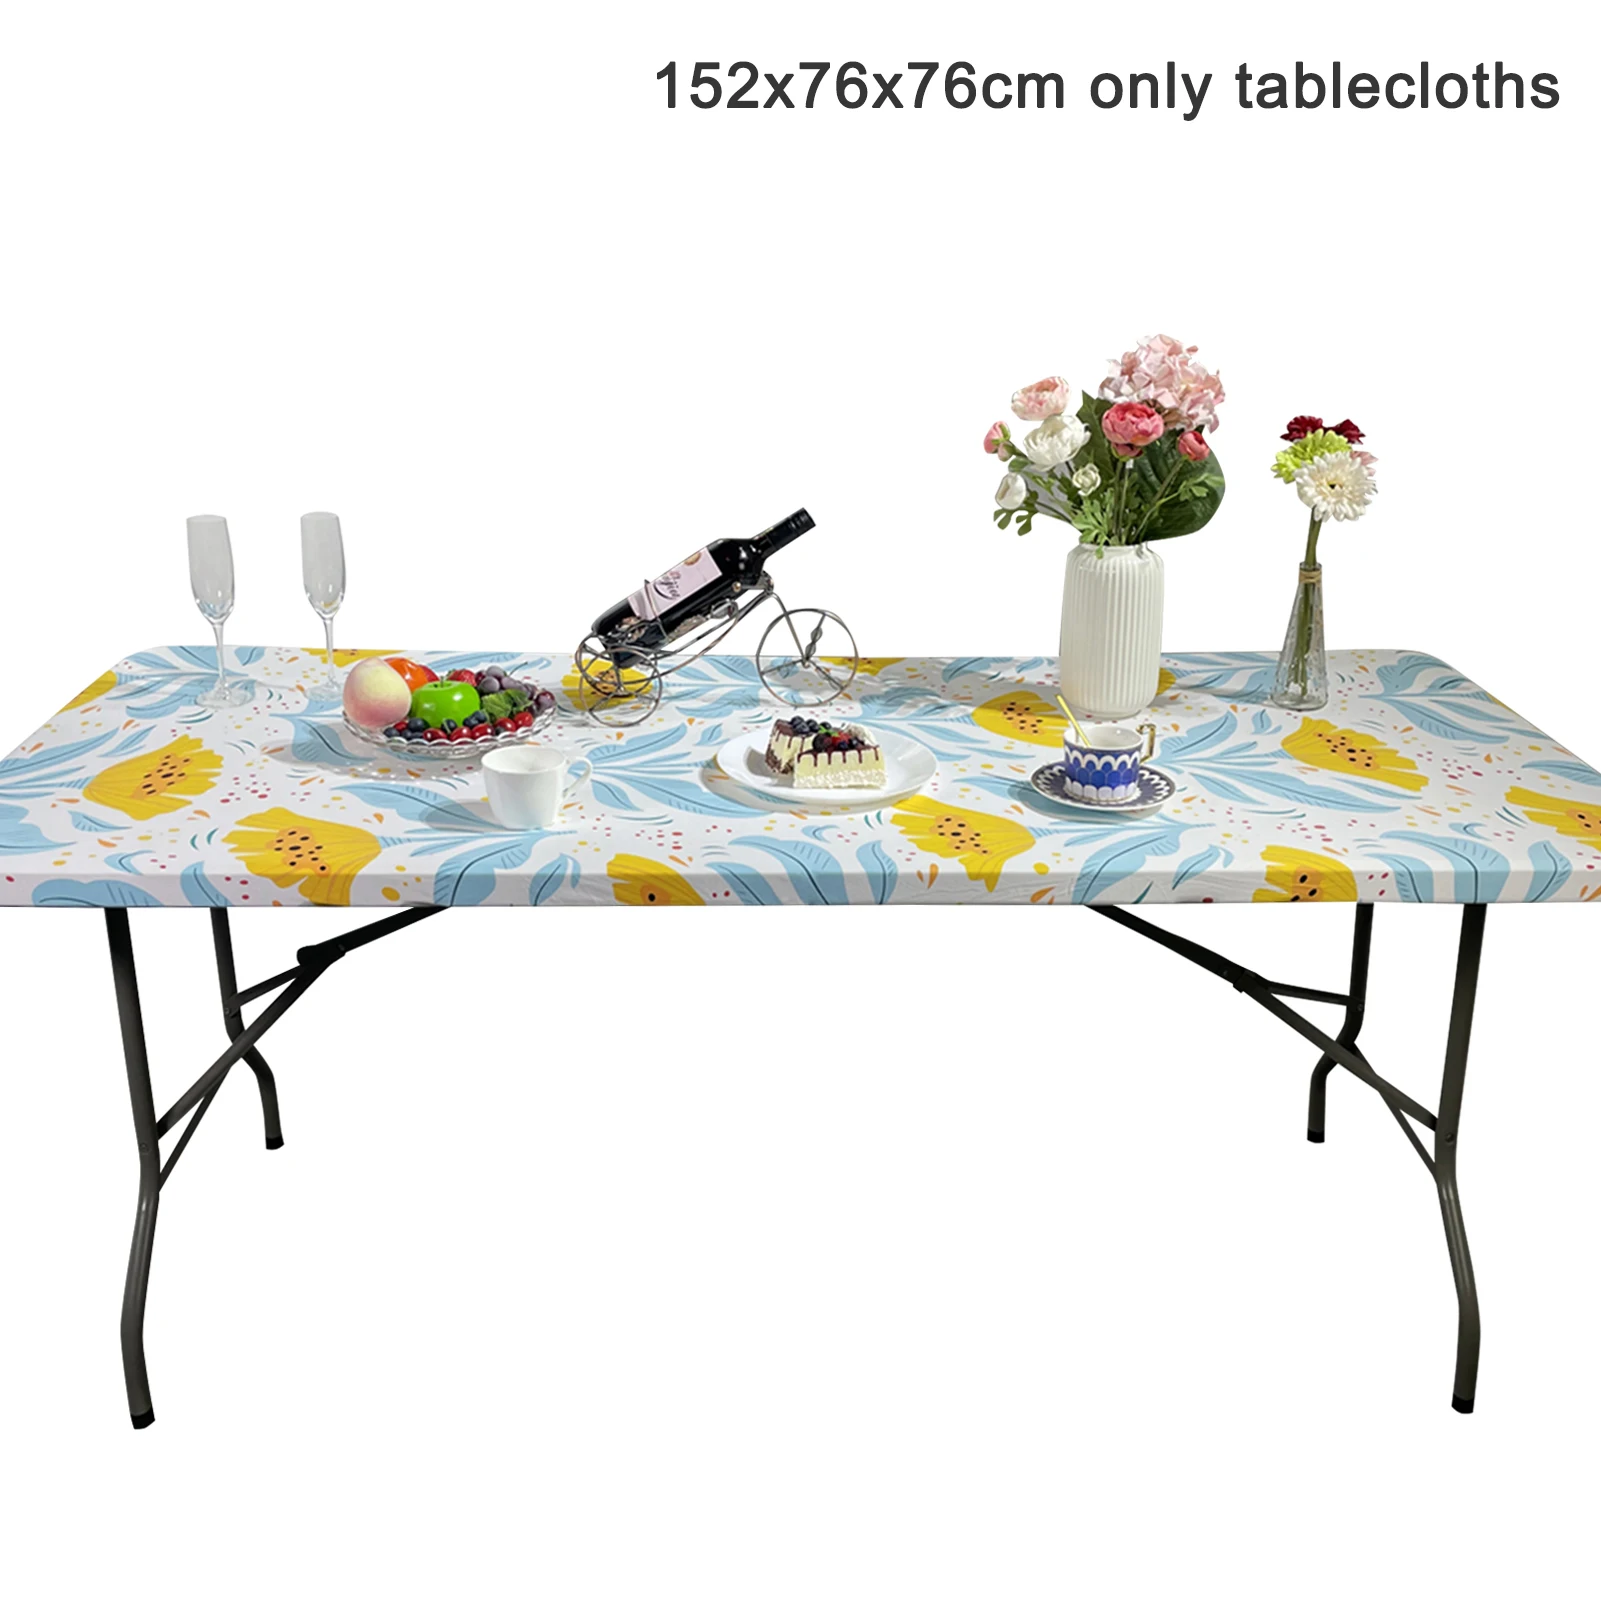 

Dinning Dirt Resistant Picnic Home Waterproof Spillproof Kitchen Buffet Parties Elastic Edge Rectangle Tablecloth Decoration